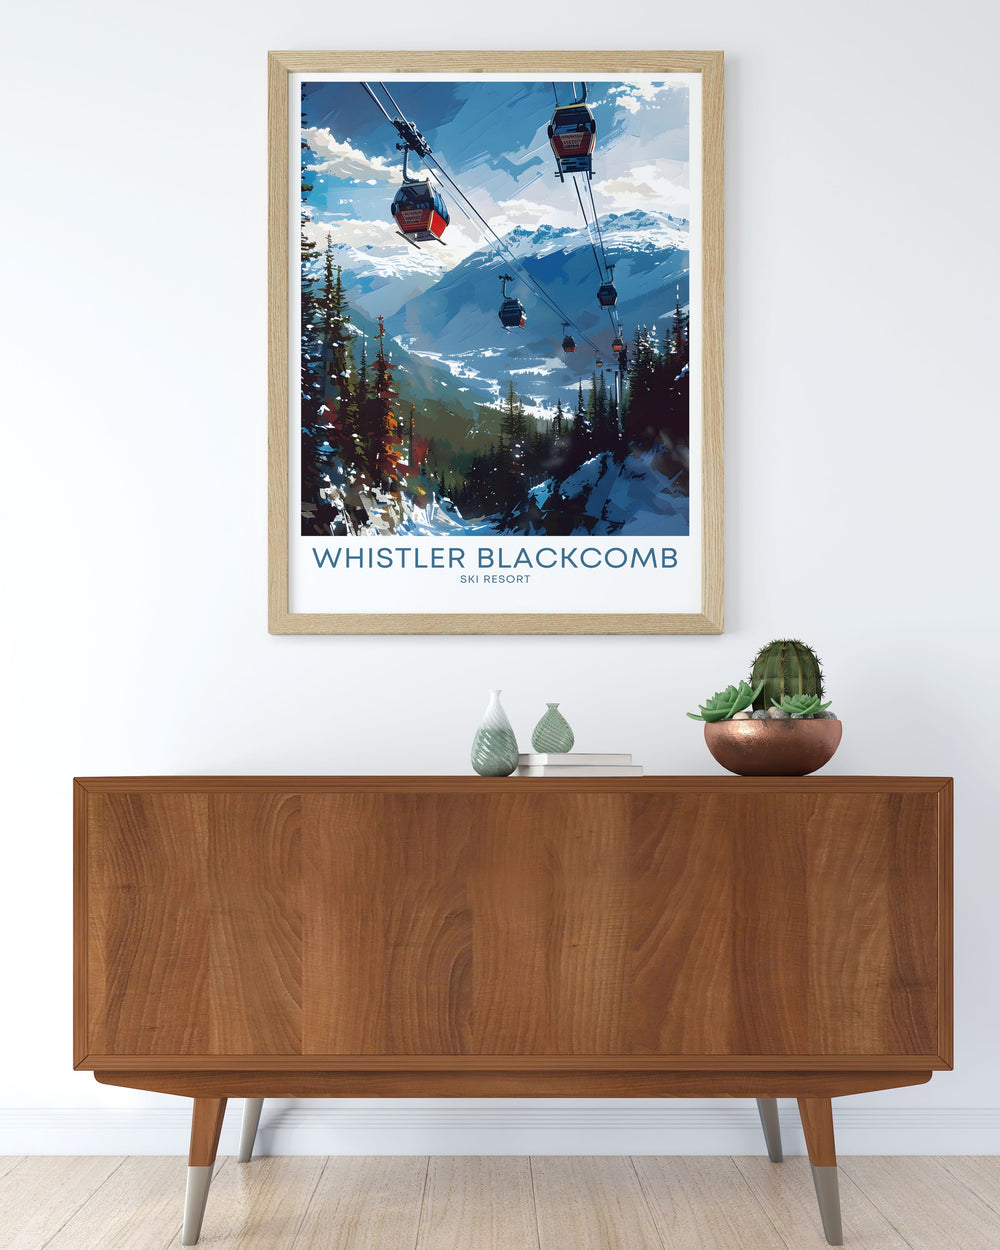 Peak 2 Peak Gondola travel poster capturing the essence of Whistler Canada. This vintage ski poster showcases the vibrant energy of Whistler Blackcomb and is an ideal addition to any ski enthusiasts collection or home decor setup.